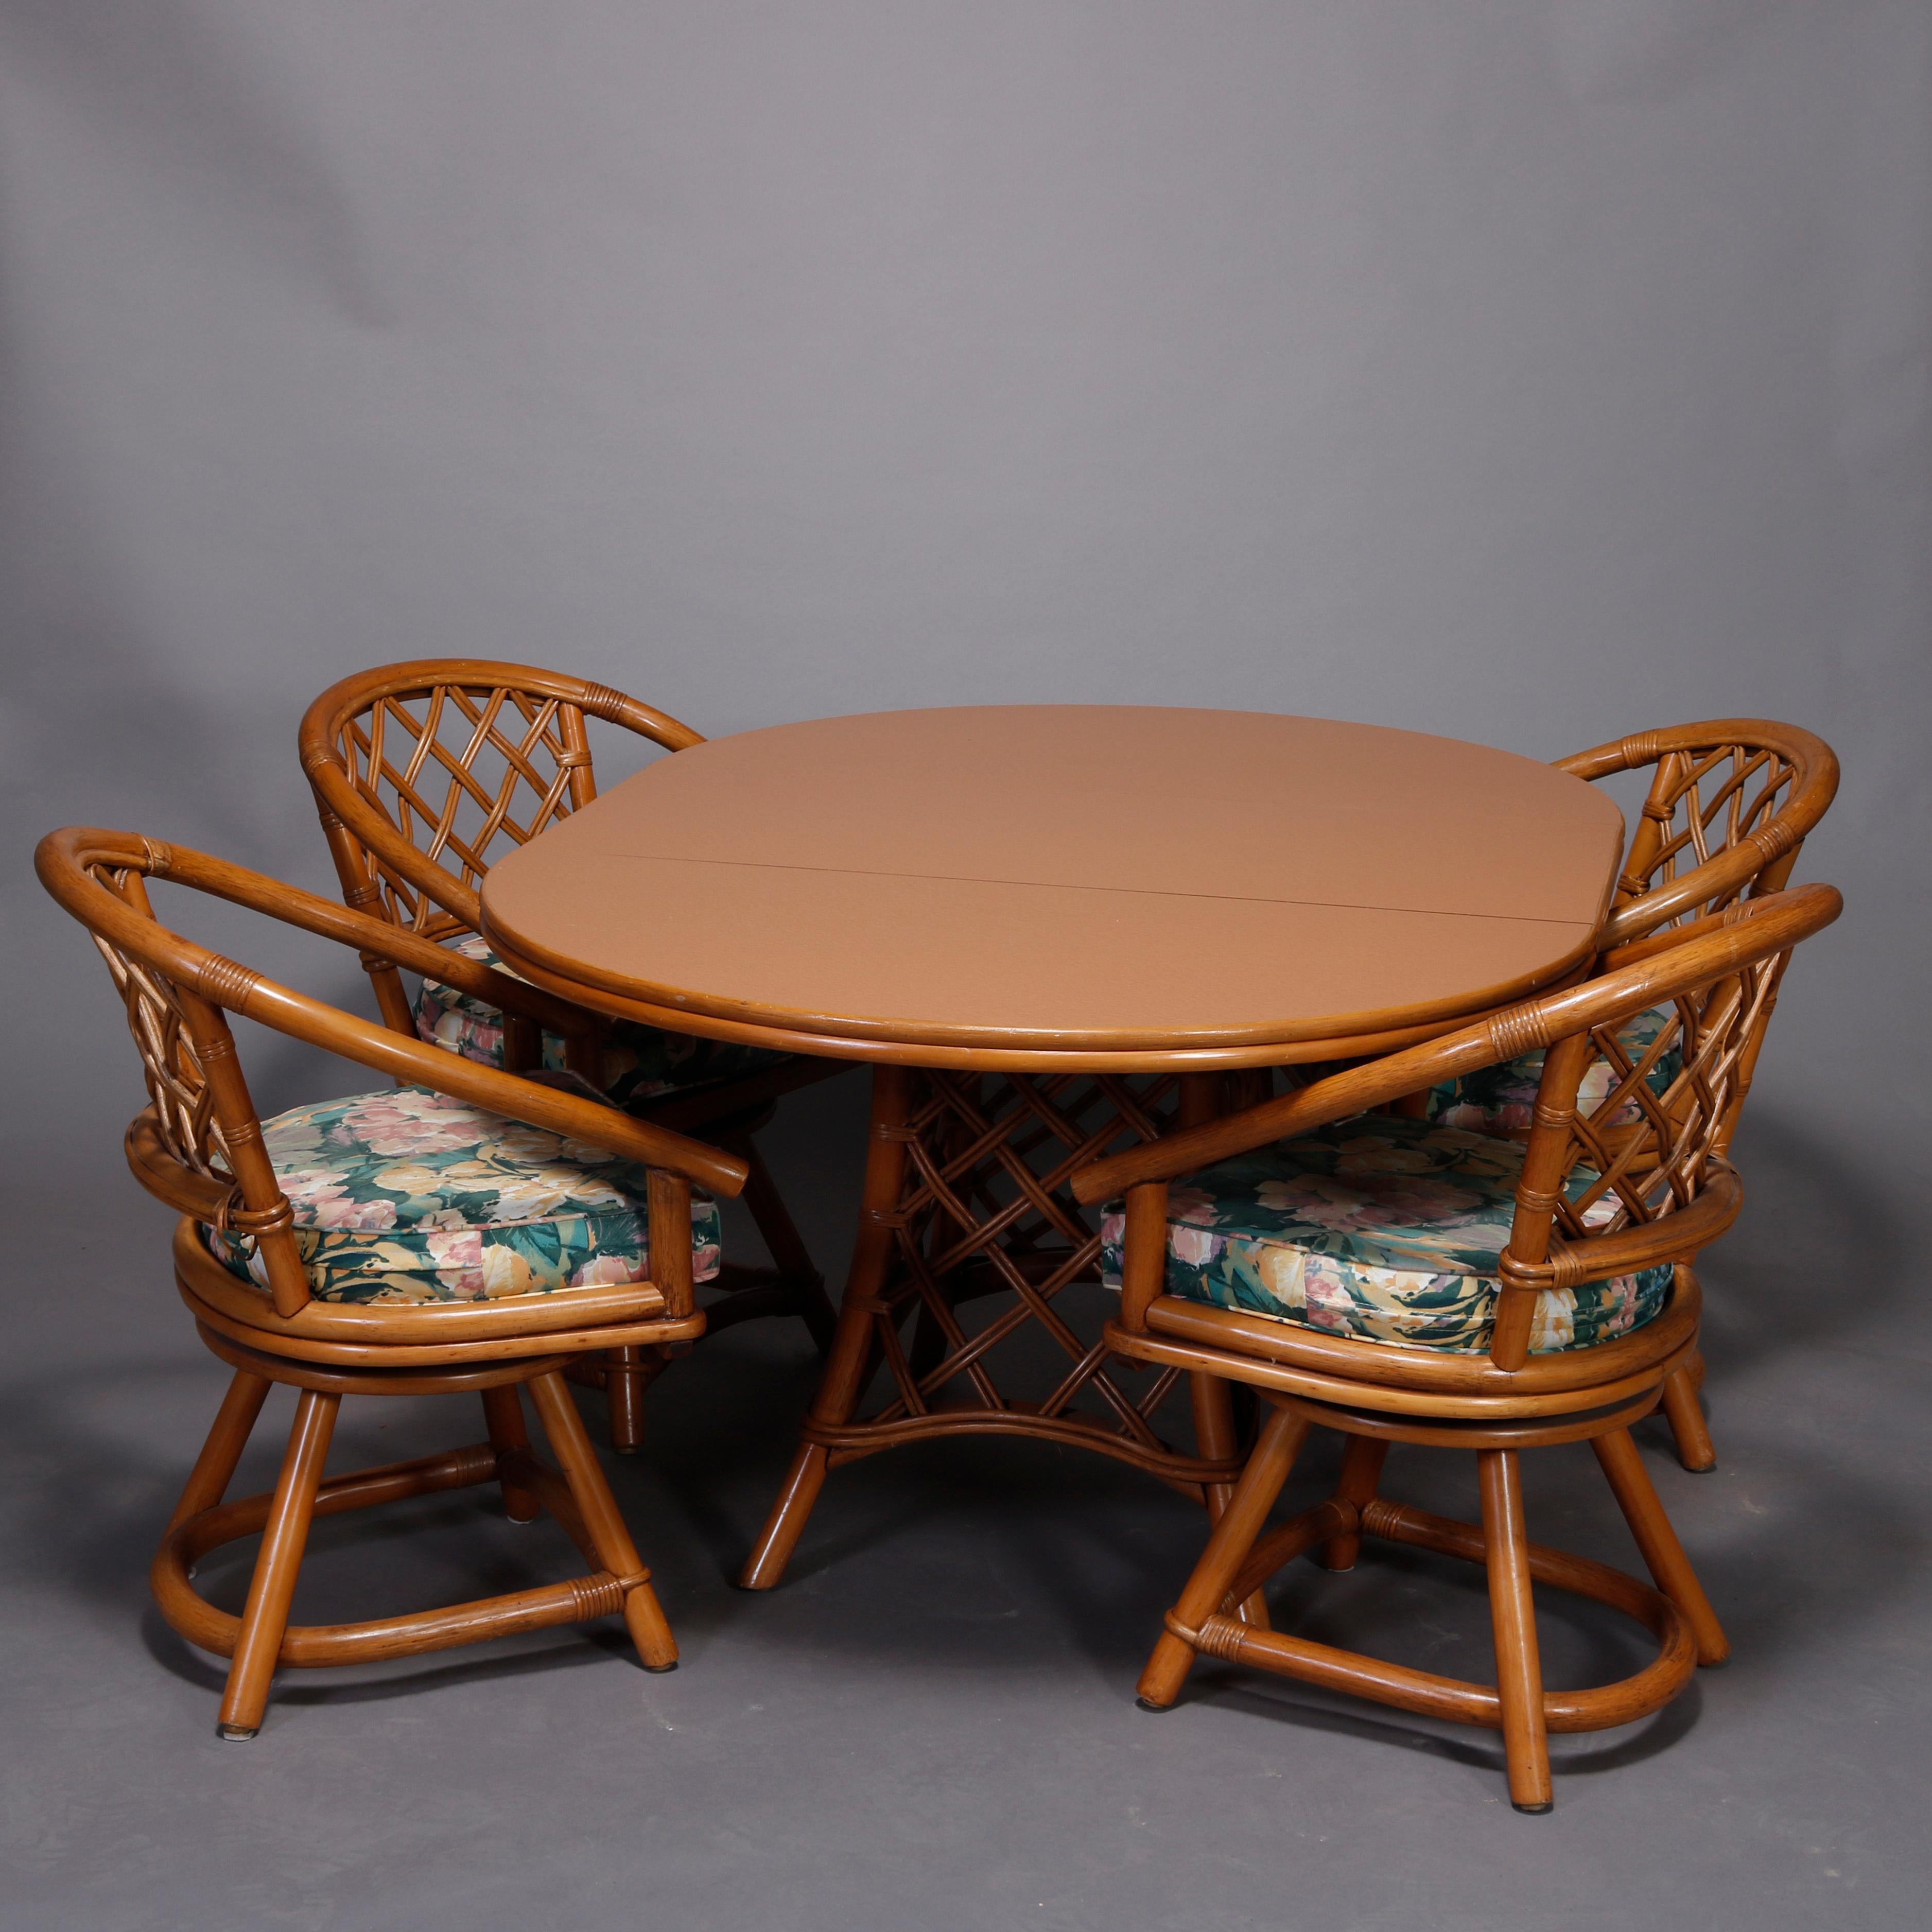 American Mid-Century Modern Rattan Dining Set, Table and Four Chairs, 20th Century